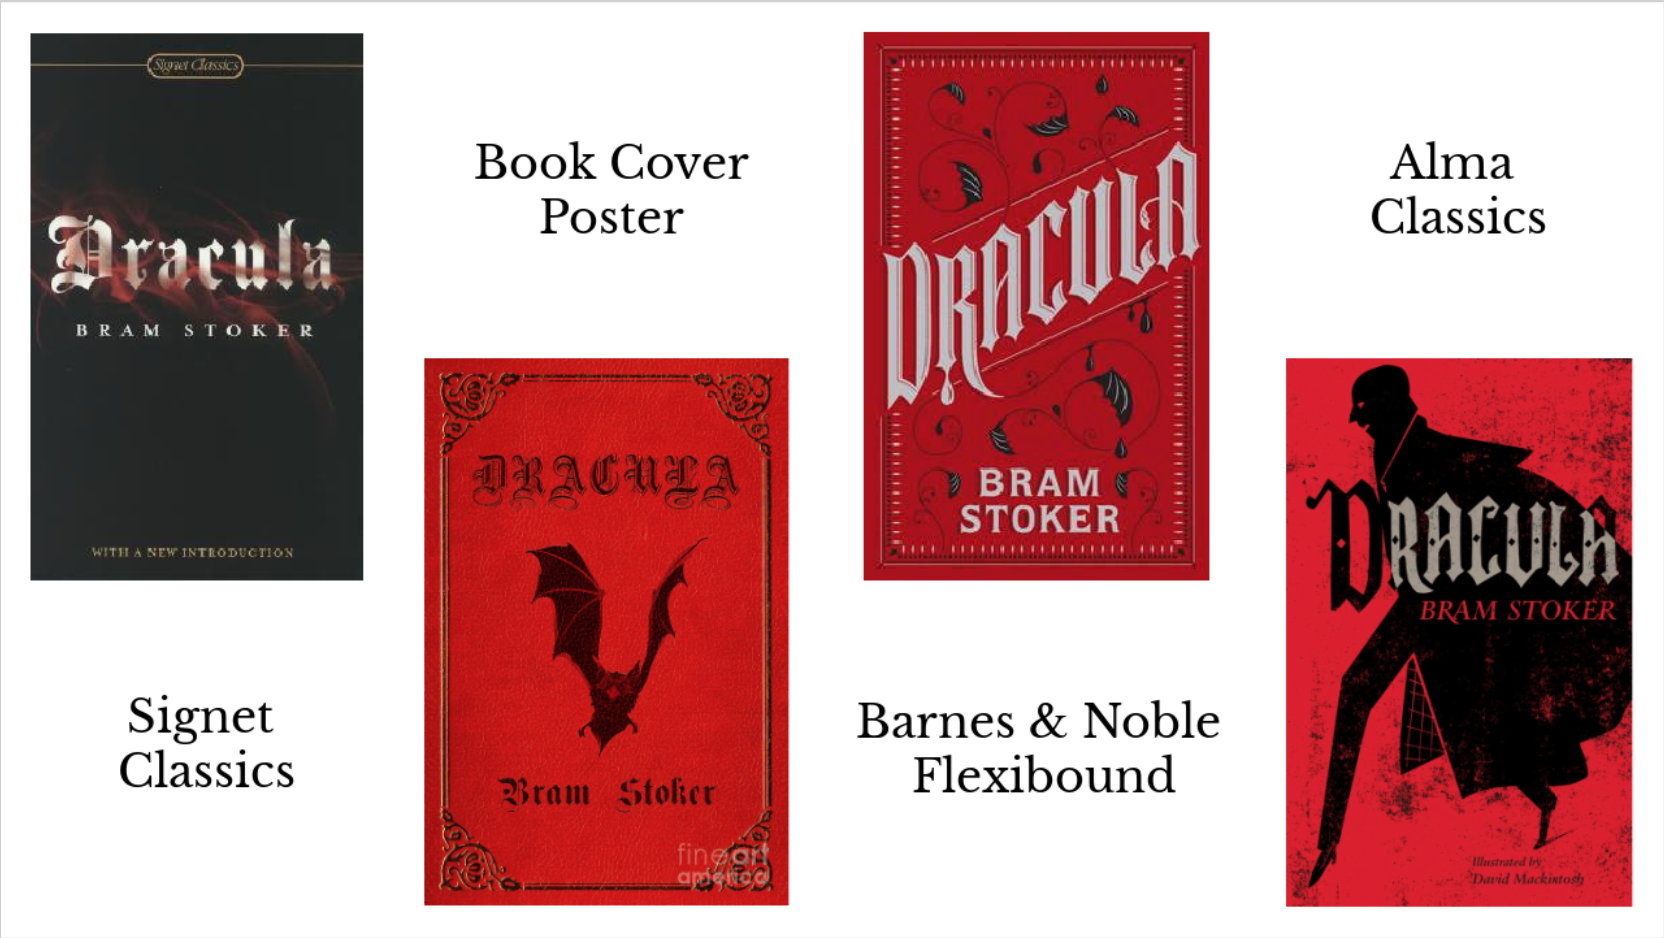 Some different editions of Dracula by Bram Stoker